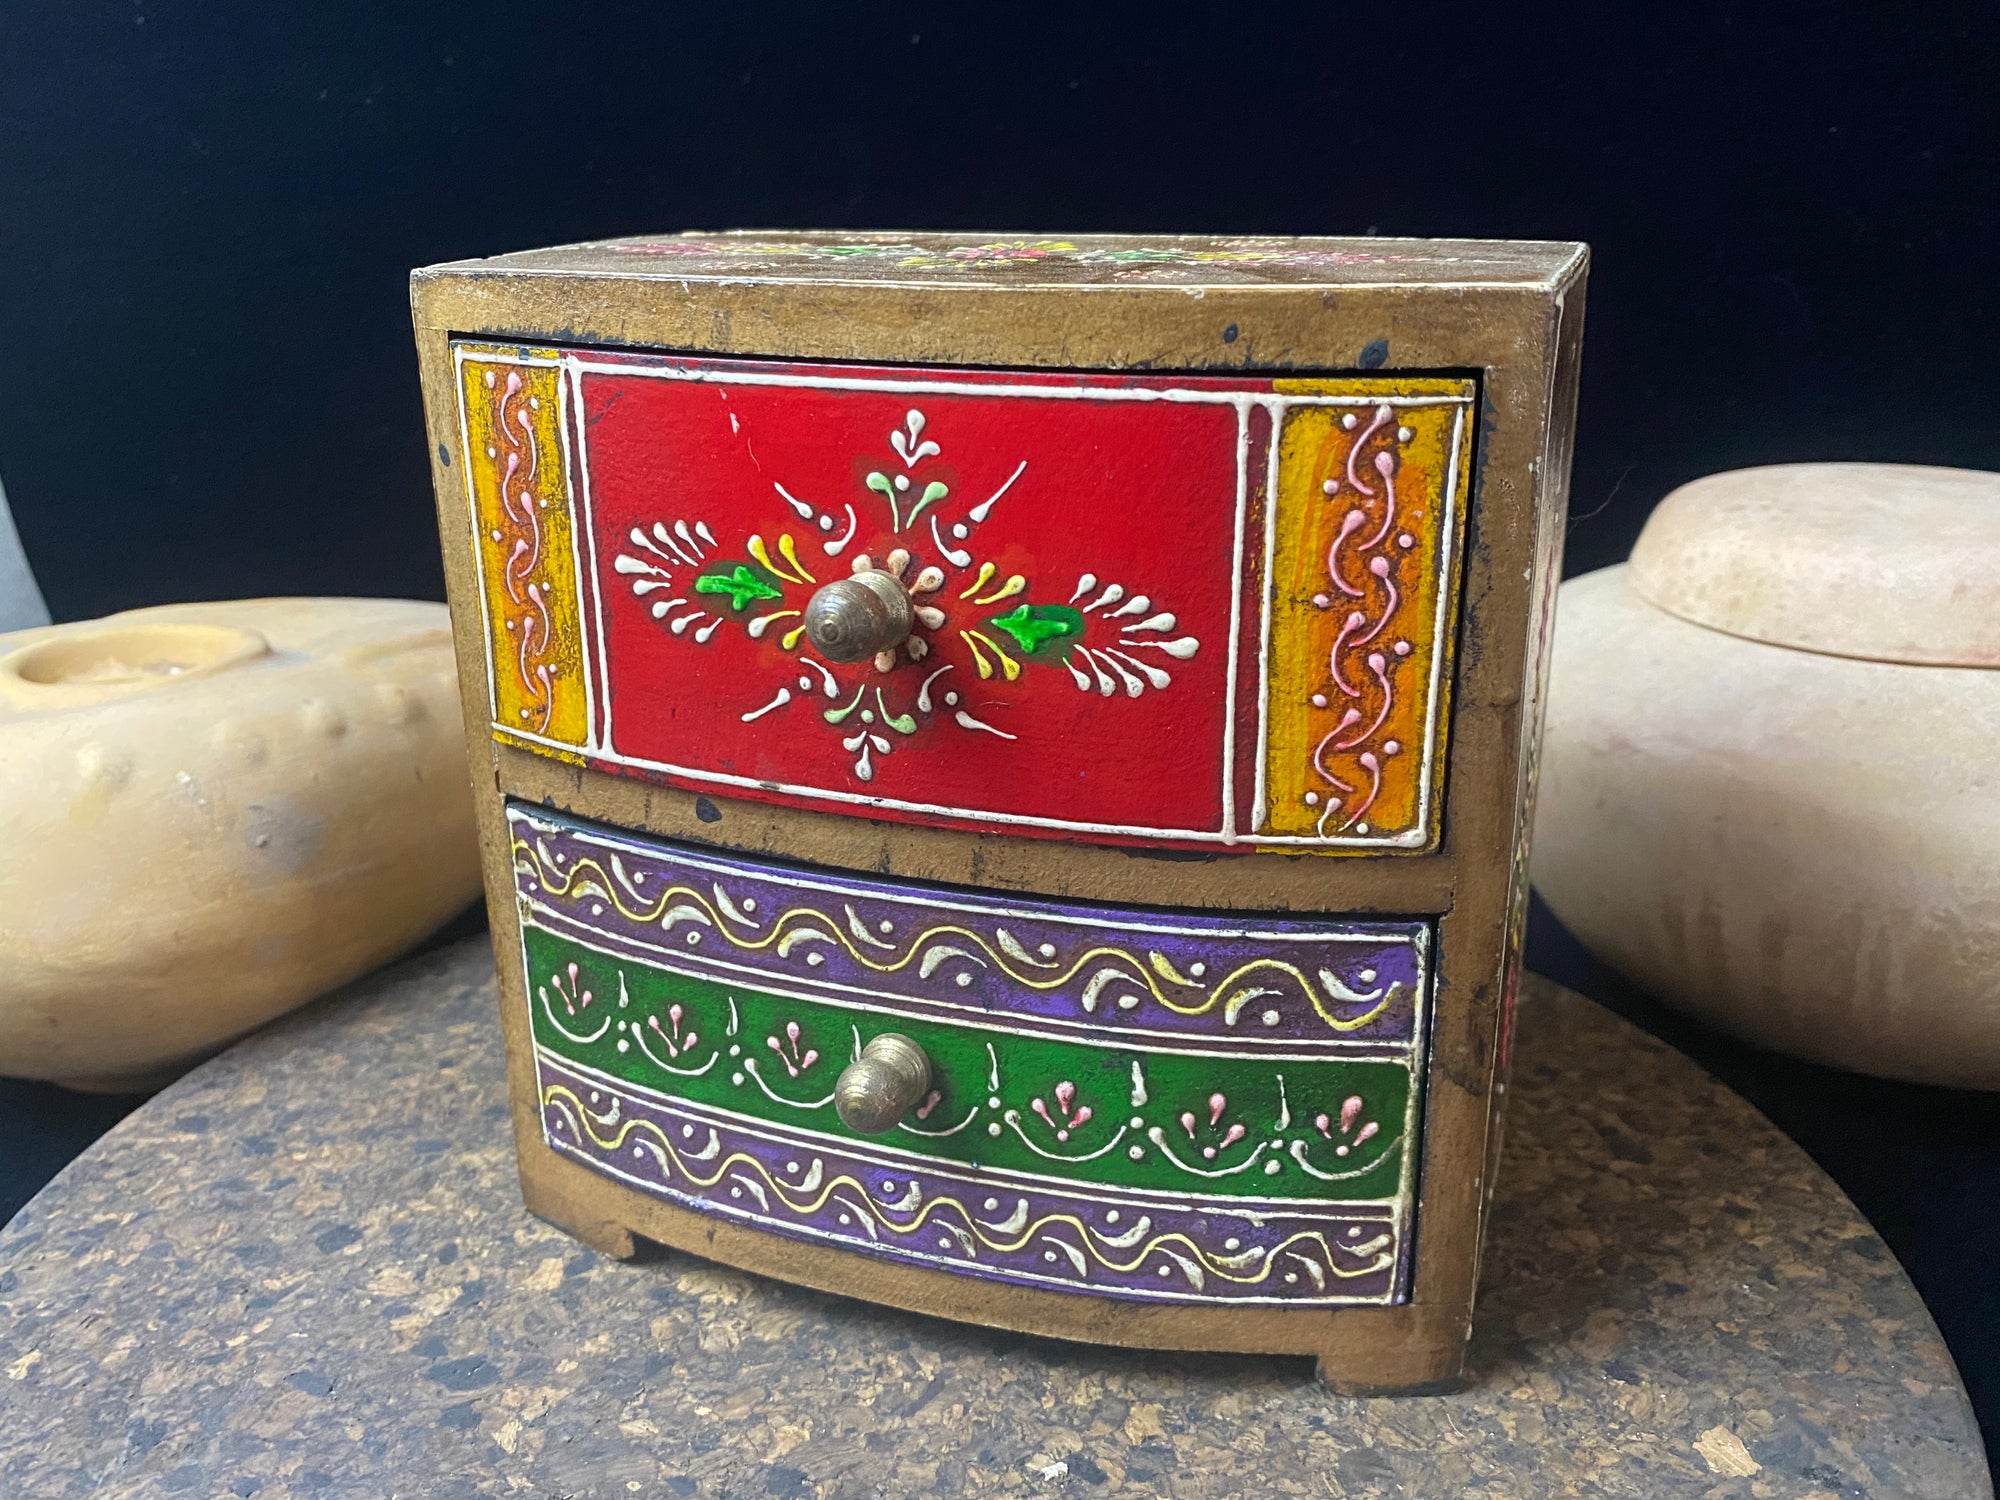 Vibrant hand painted trinket box with two drawers. Small brass knobs as handles. Perfect decorated box to keep trinkets in. Its large roomy drwers makes this a great box to hold small essential oils or jewellery.  From Rajasthan, India.  Measurements: 15 x 8.5 cm, height 15 cm